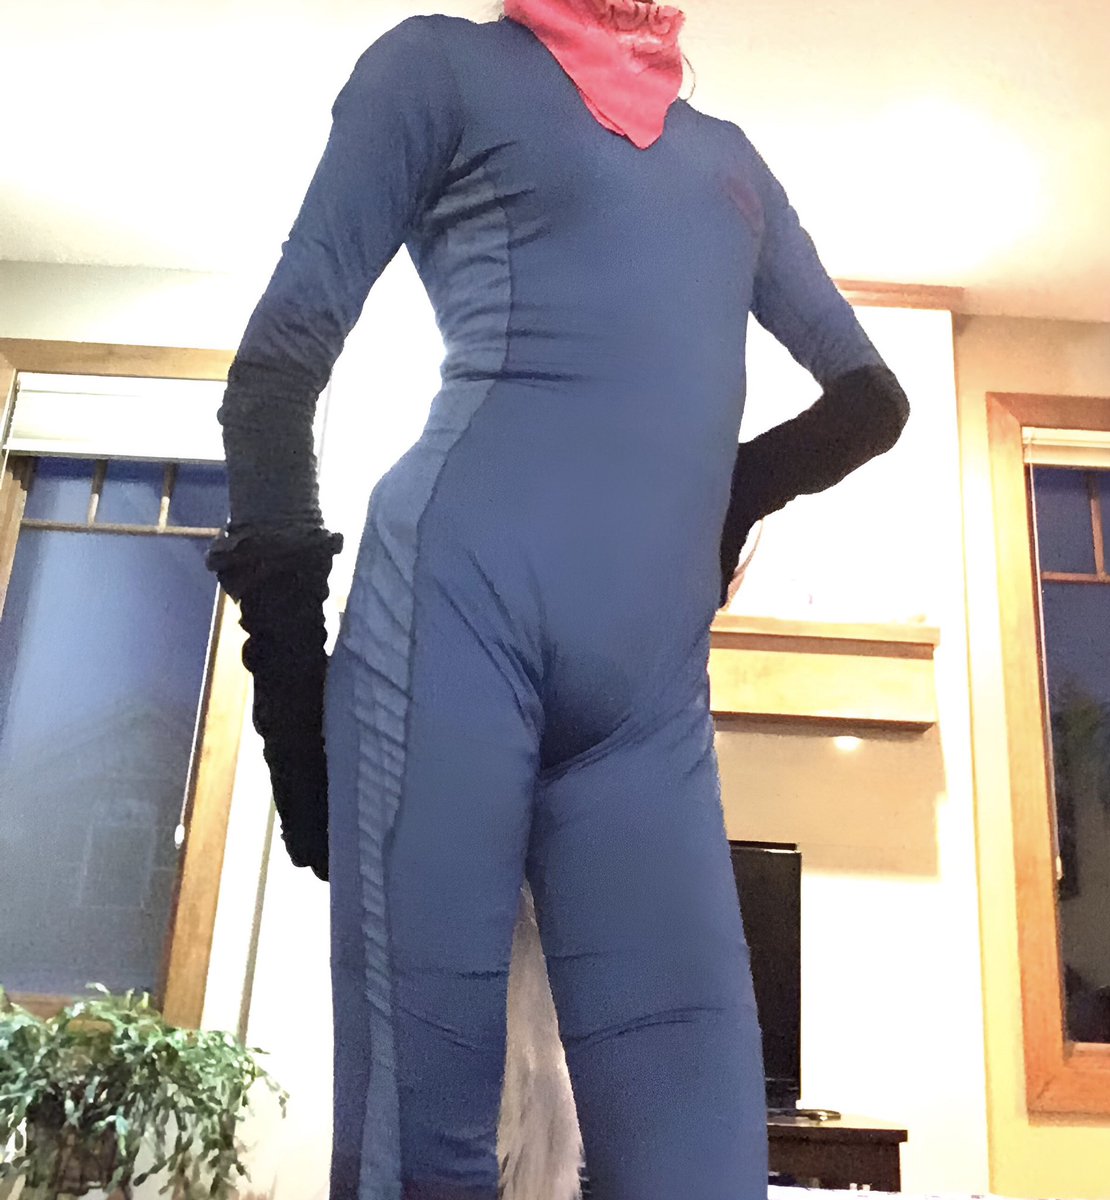 My bodysuit for Halloween #jumpsuit #jumpsuits #skinsuit #skinsuits #tight_clothes #tightclothing #tightclothinglover #tightsuit #bodysuit #bodysuits #bodysuitstyle #bodysuitoutfit #bodysuit✨💗 #halloween #halloween2023 #abbao #ab_bao